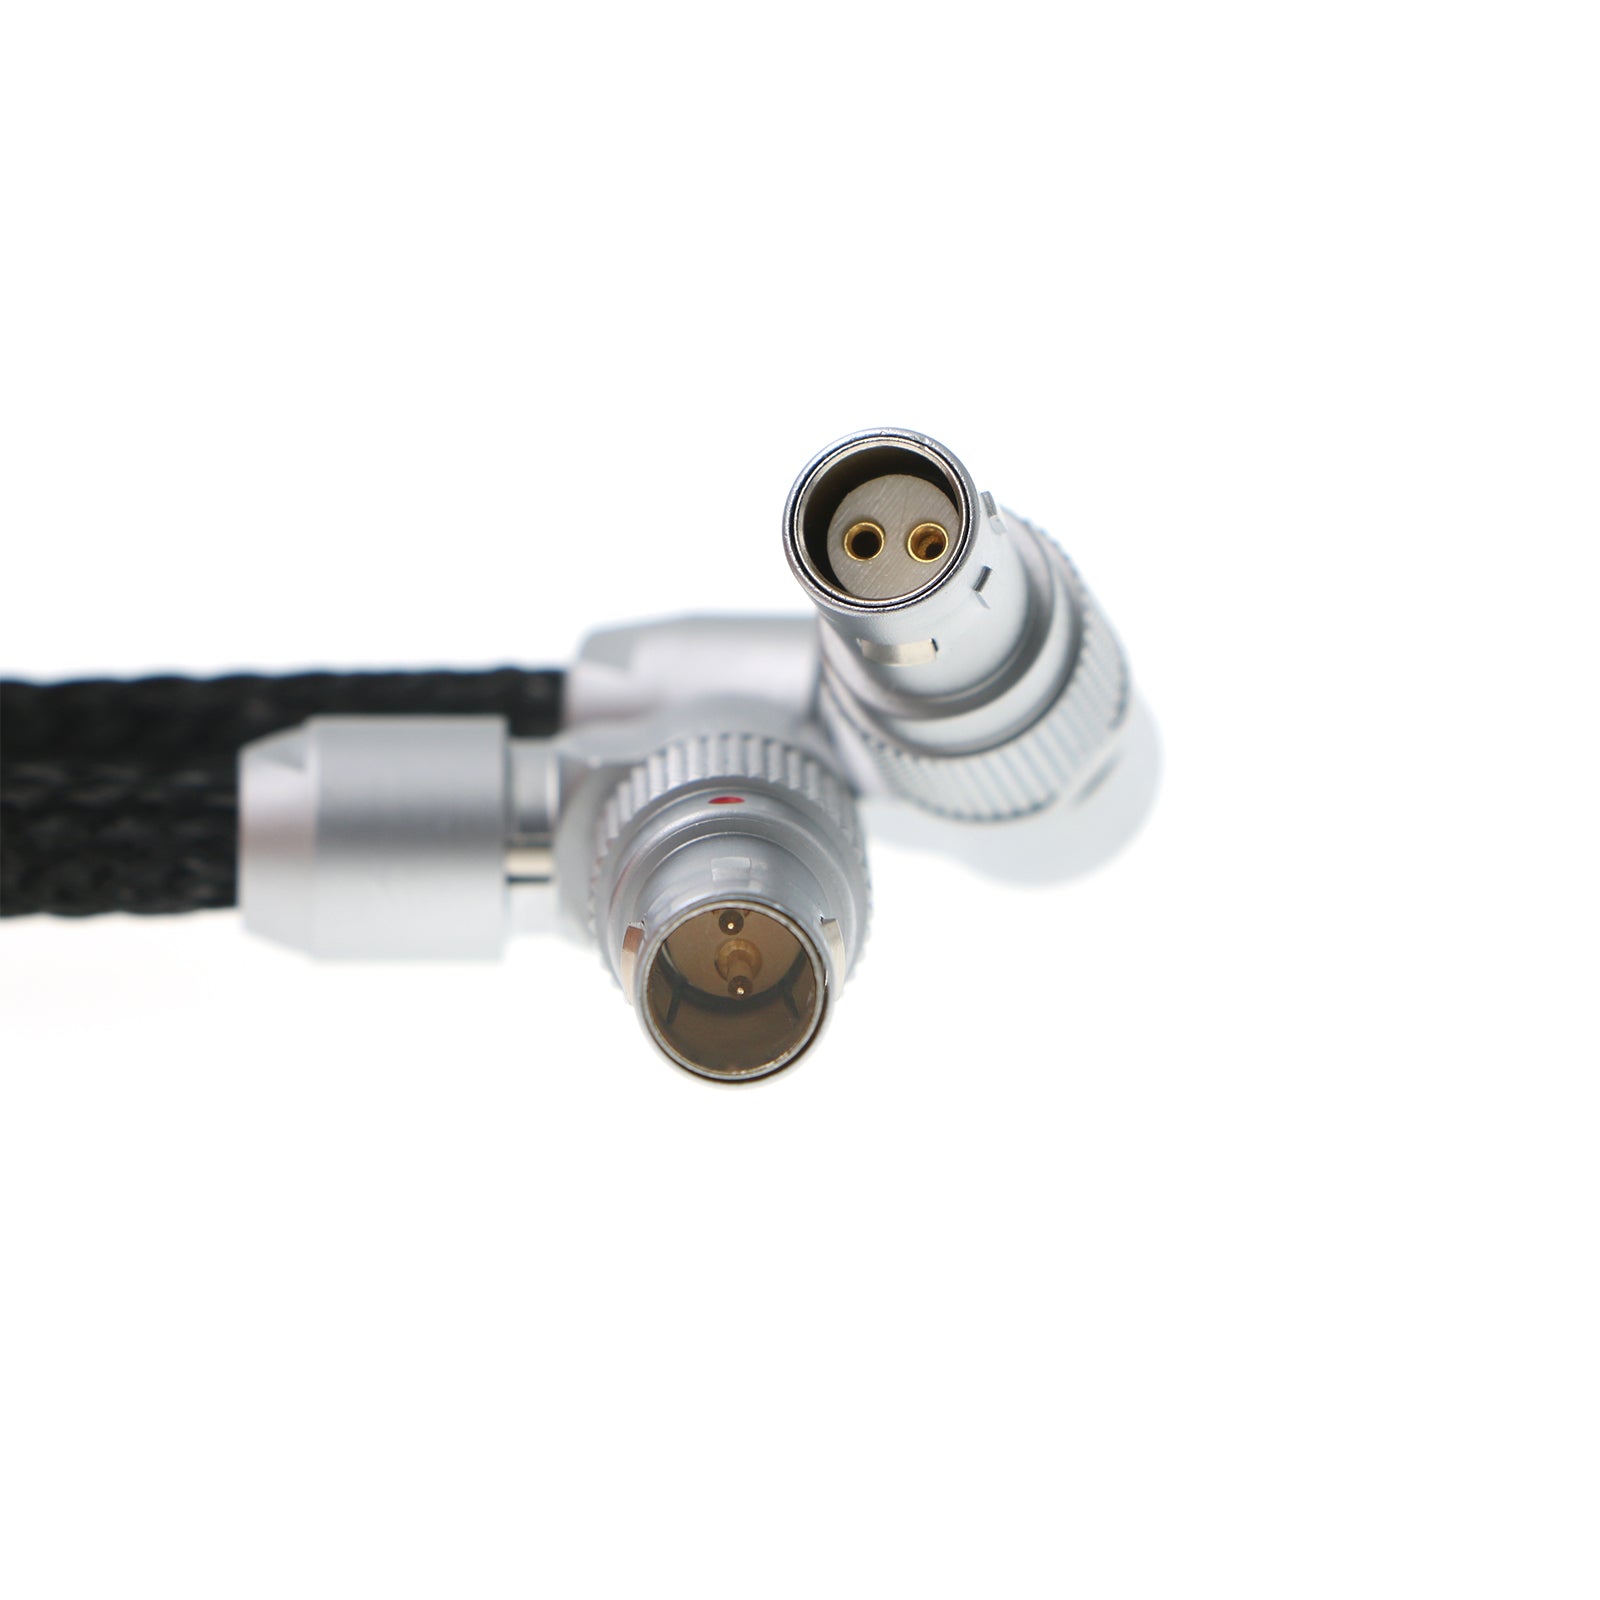 Alvin's Cables for Red-Komodo Rotatable Flexible Power-Cable 2-Pin Female to Adjustable Right-Angle 2-Pin Male Cord